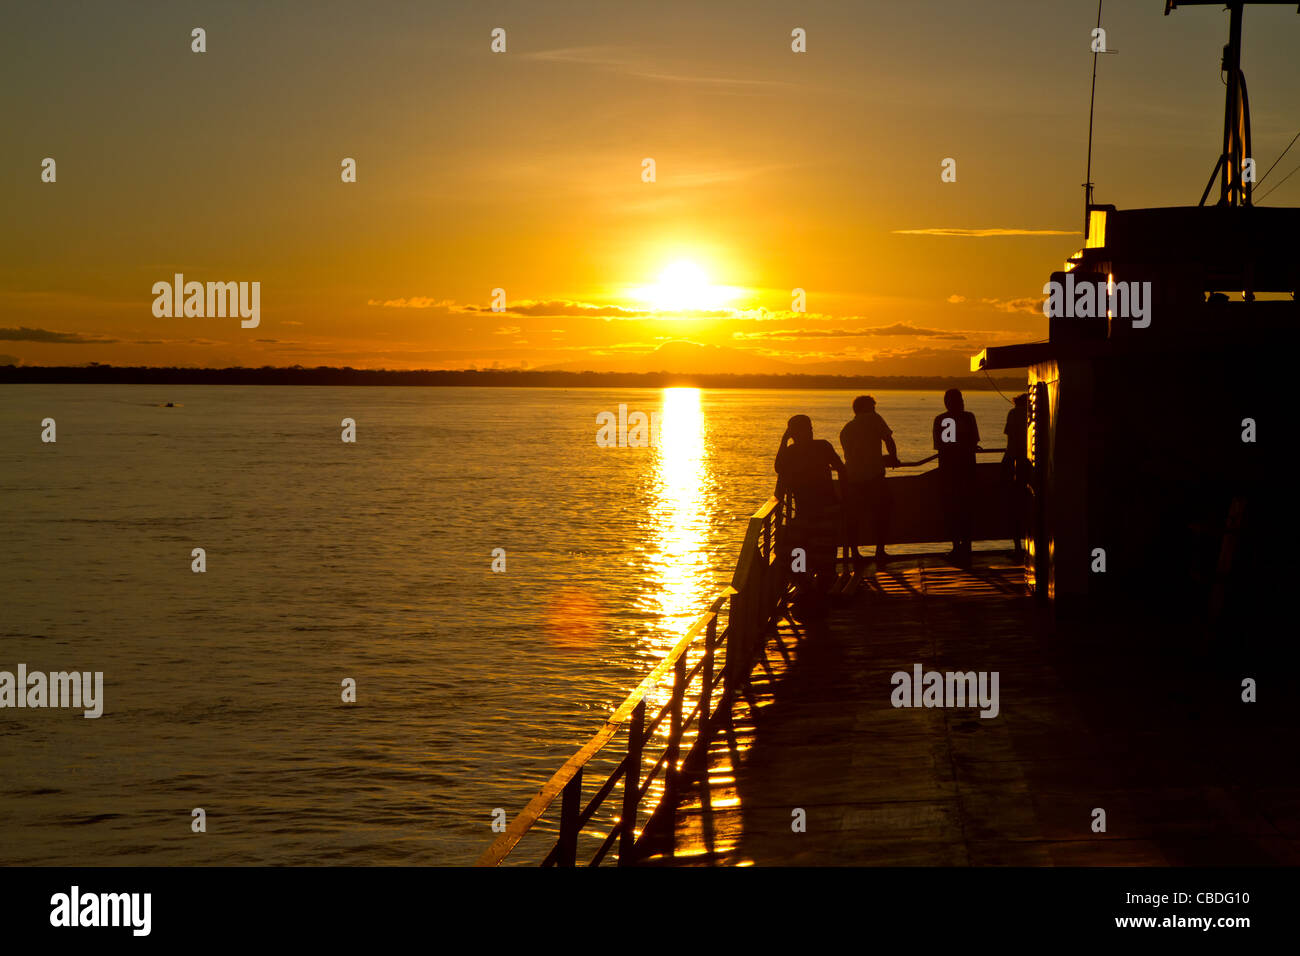 Some friends enjoy the last light on the Amazon river. Stock Photo